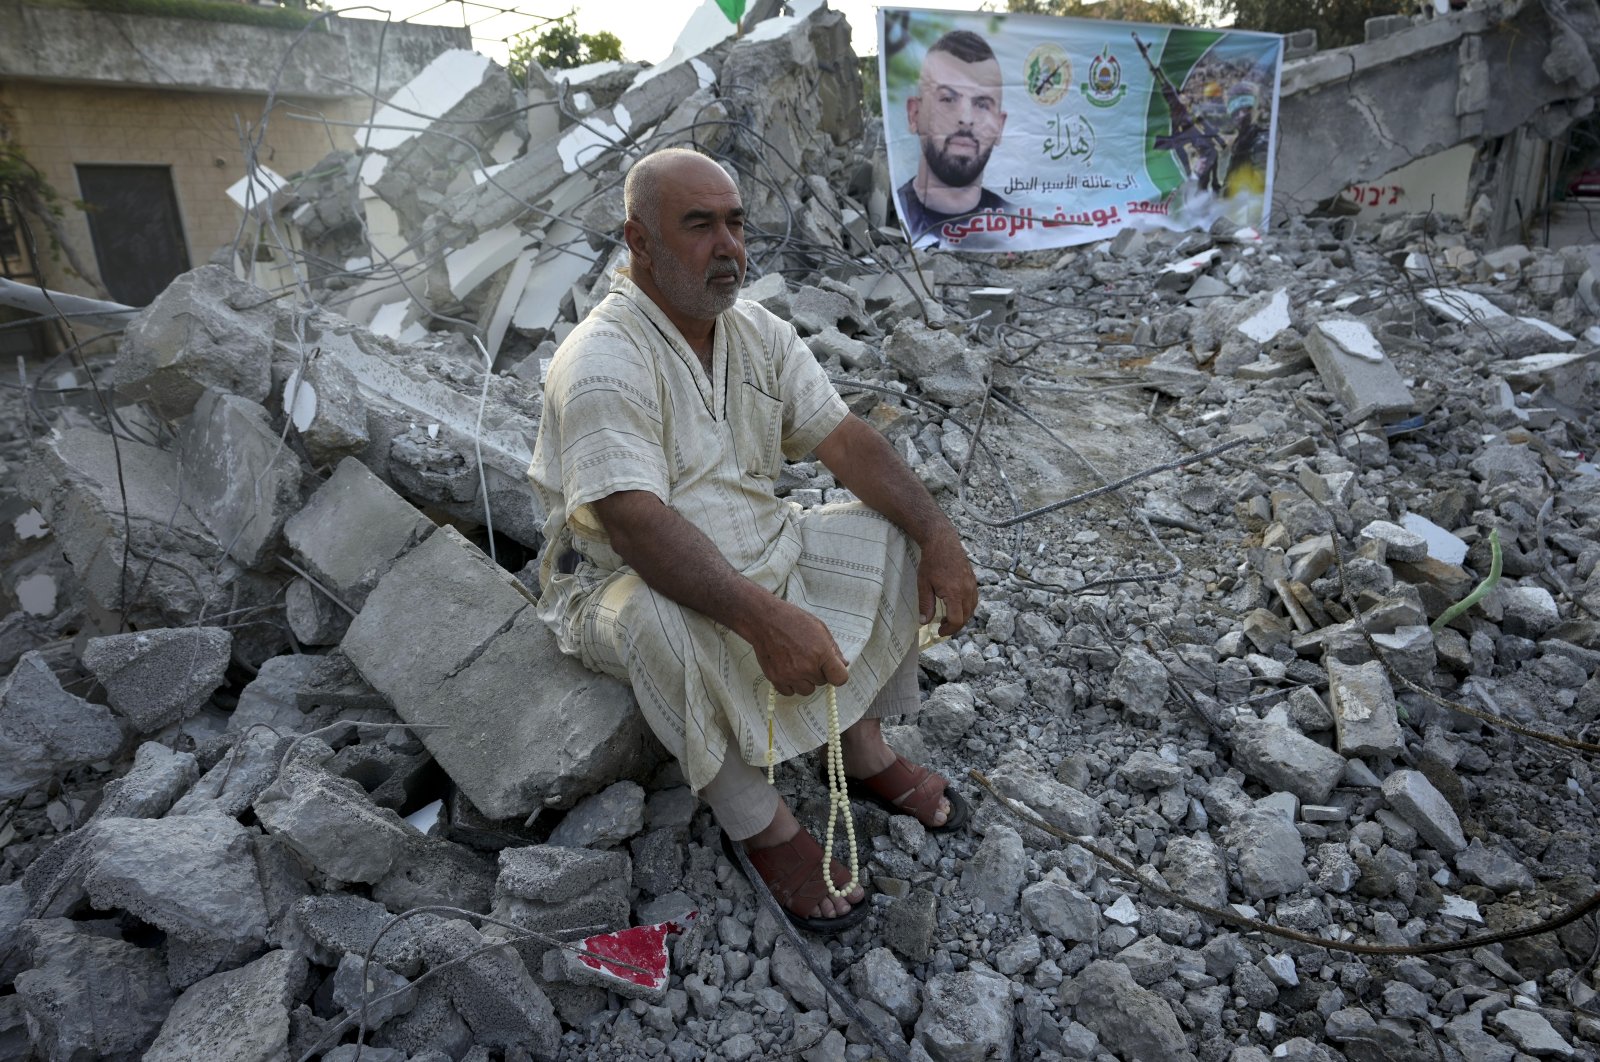 A Palestinian sits in the rubble of the house of Asad Rifai after it was demolished by Israeli forces along with the house of Subhi Sbeihat, both suspected of carrying out a deadly May 2022 attack on Israelis in the city of Elad, near Tel Aviv, in Rummana, near the occupied West Bank city of Jenin, Palestine, Aug. 8, 2022. (AP Photo)